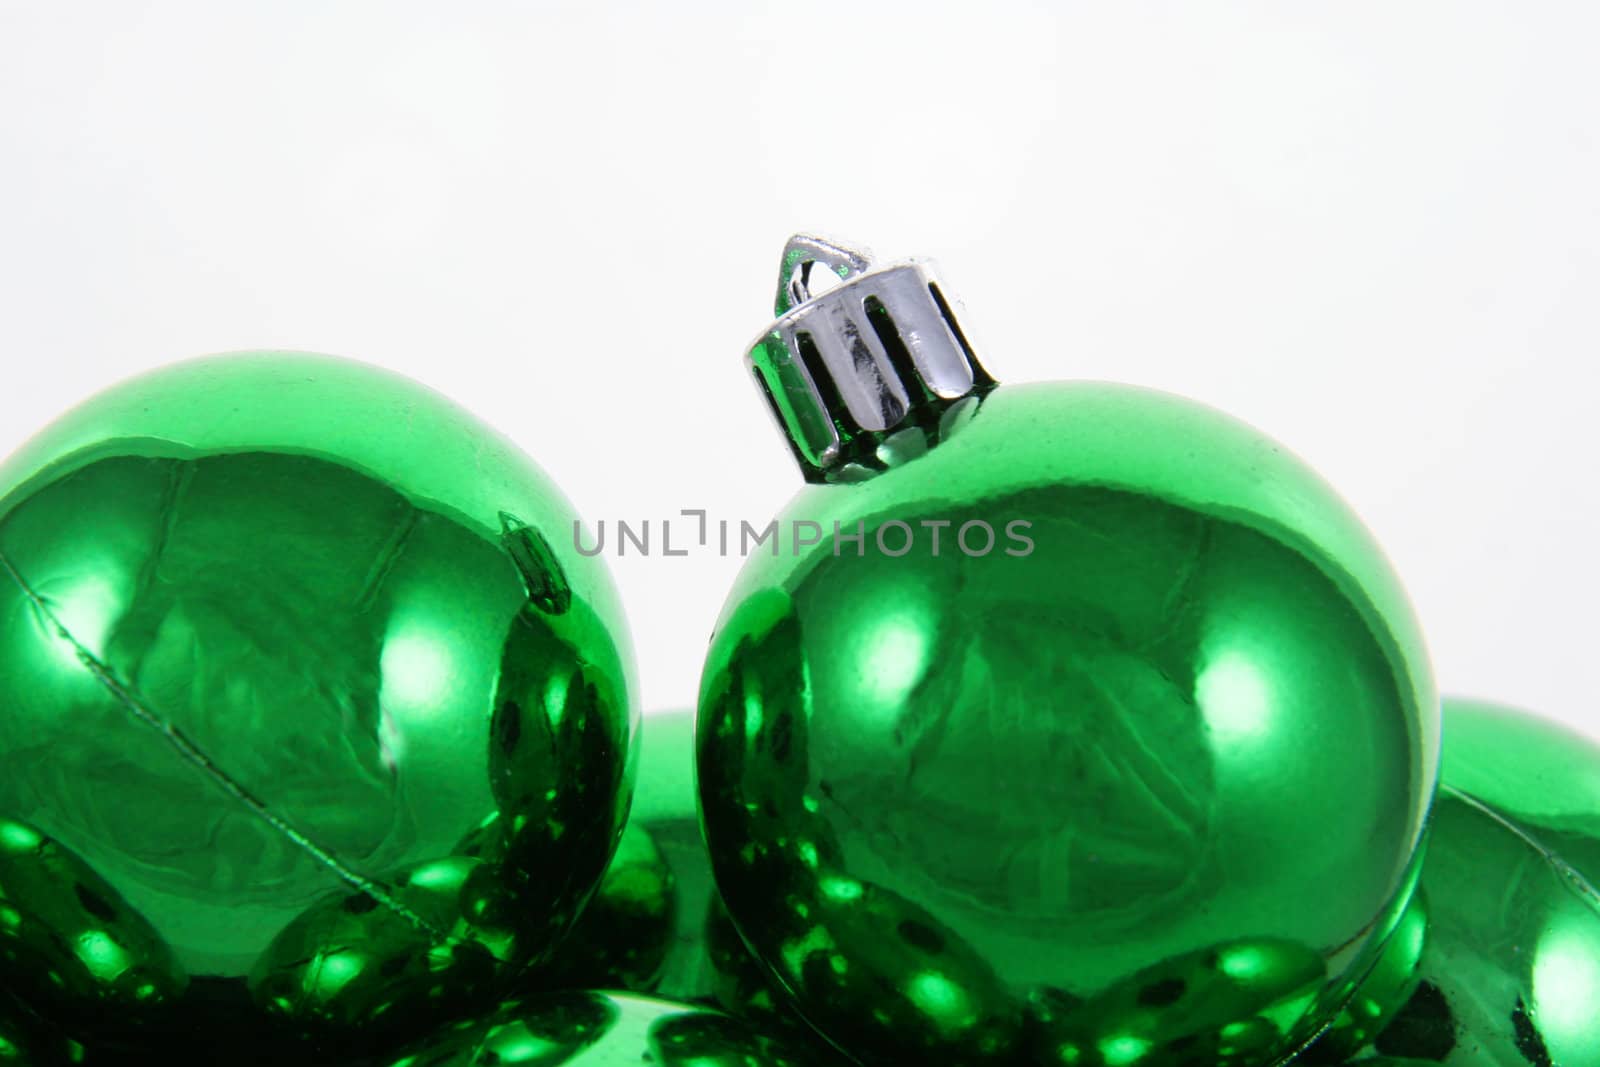 A bunch of green Christmas baubles against a white background.
